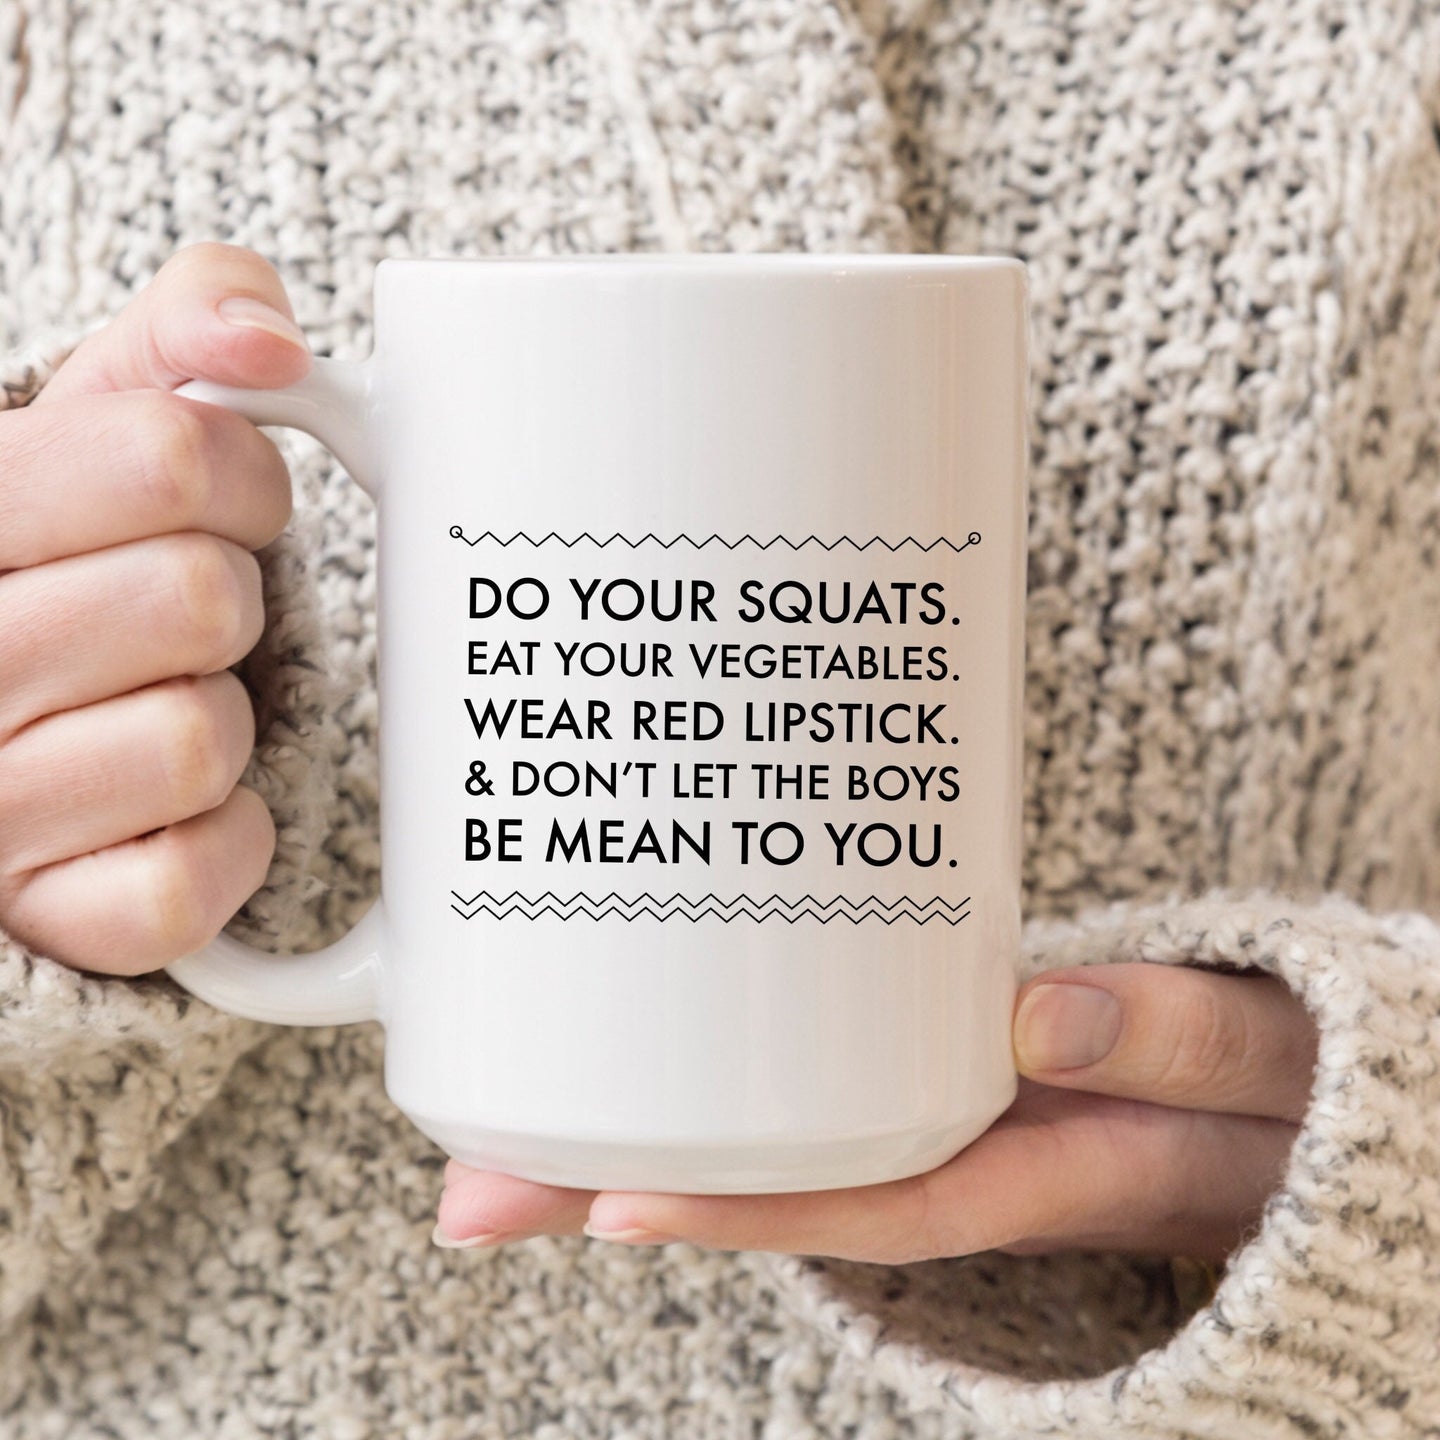 Do Your Squats, Eat Your Vegetables, Wear Red Lipstick, & Don't Let the Boys Be Mean to You.